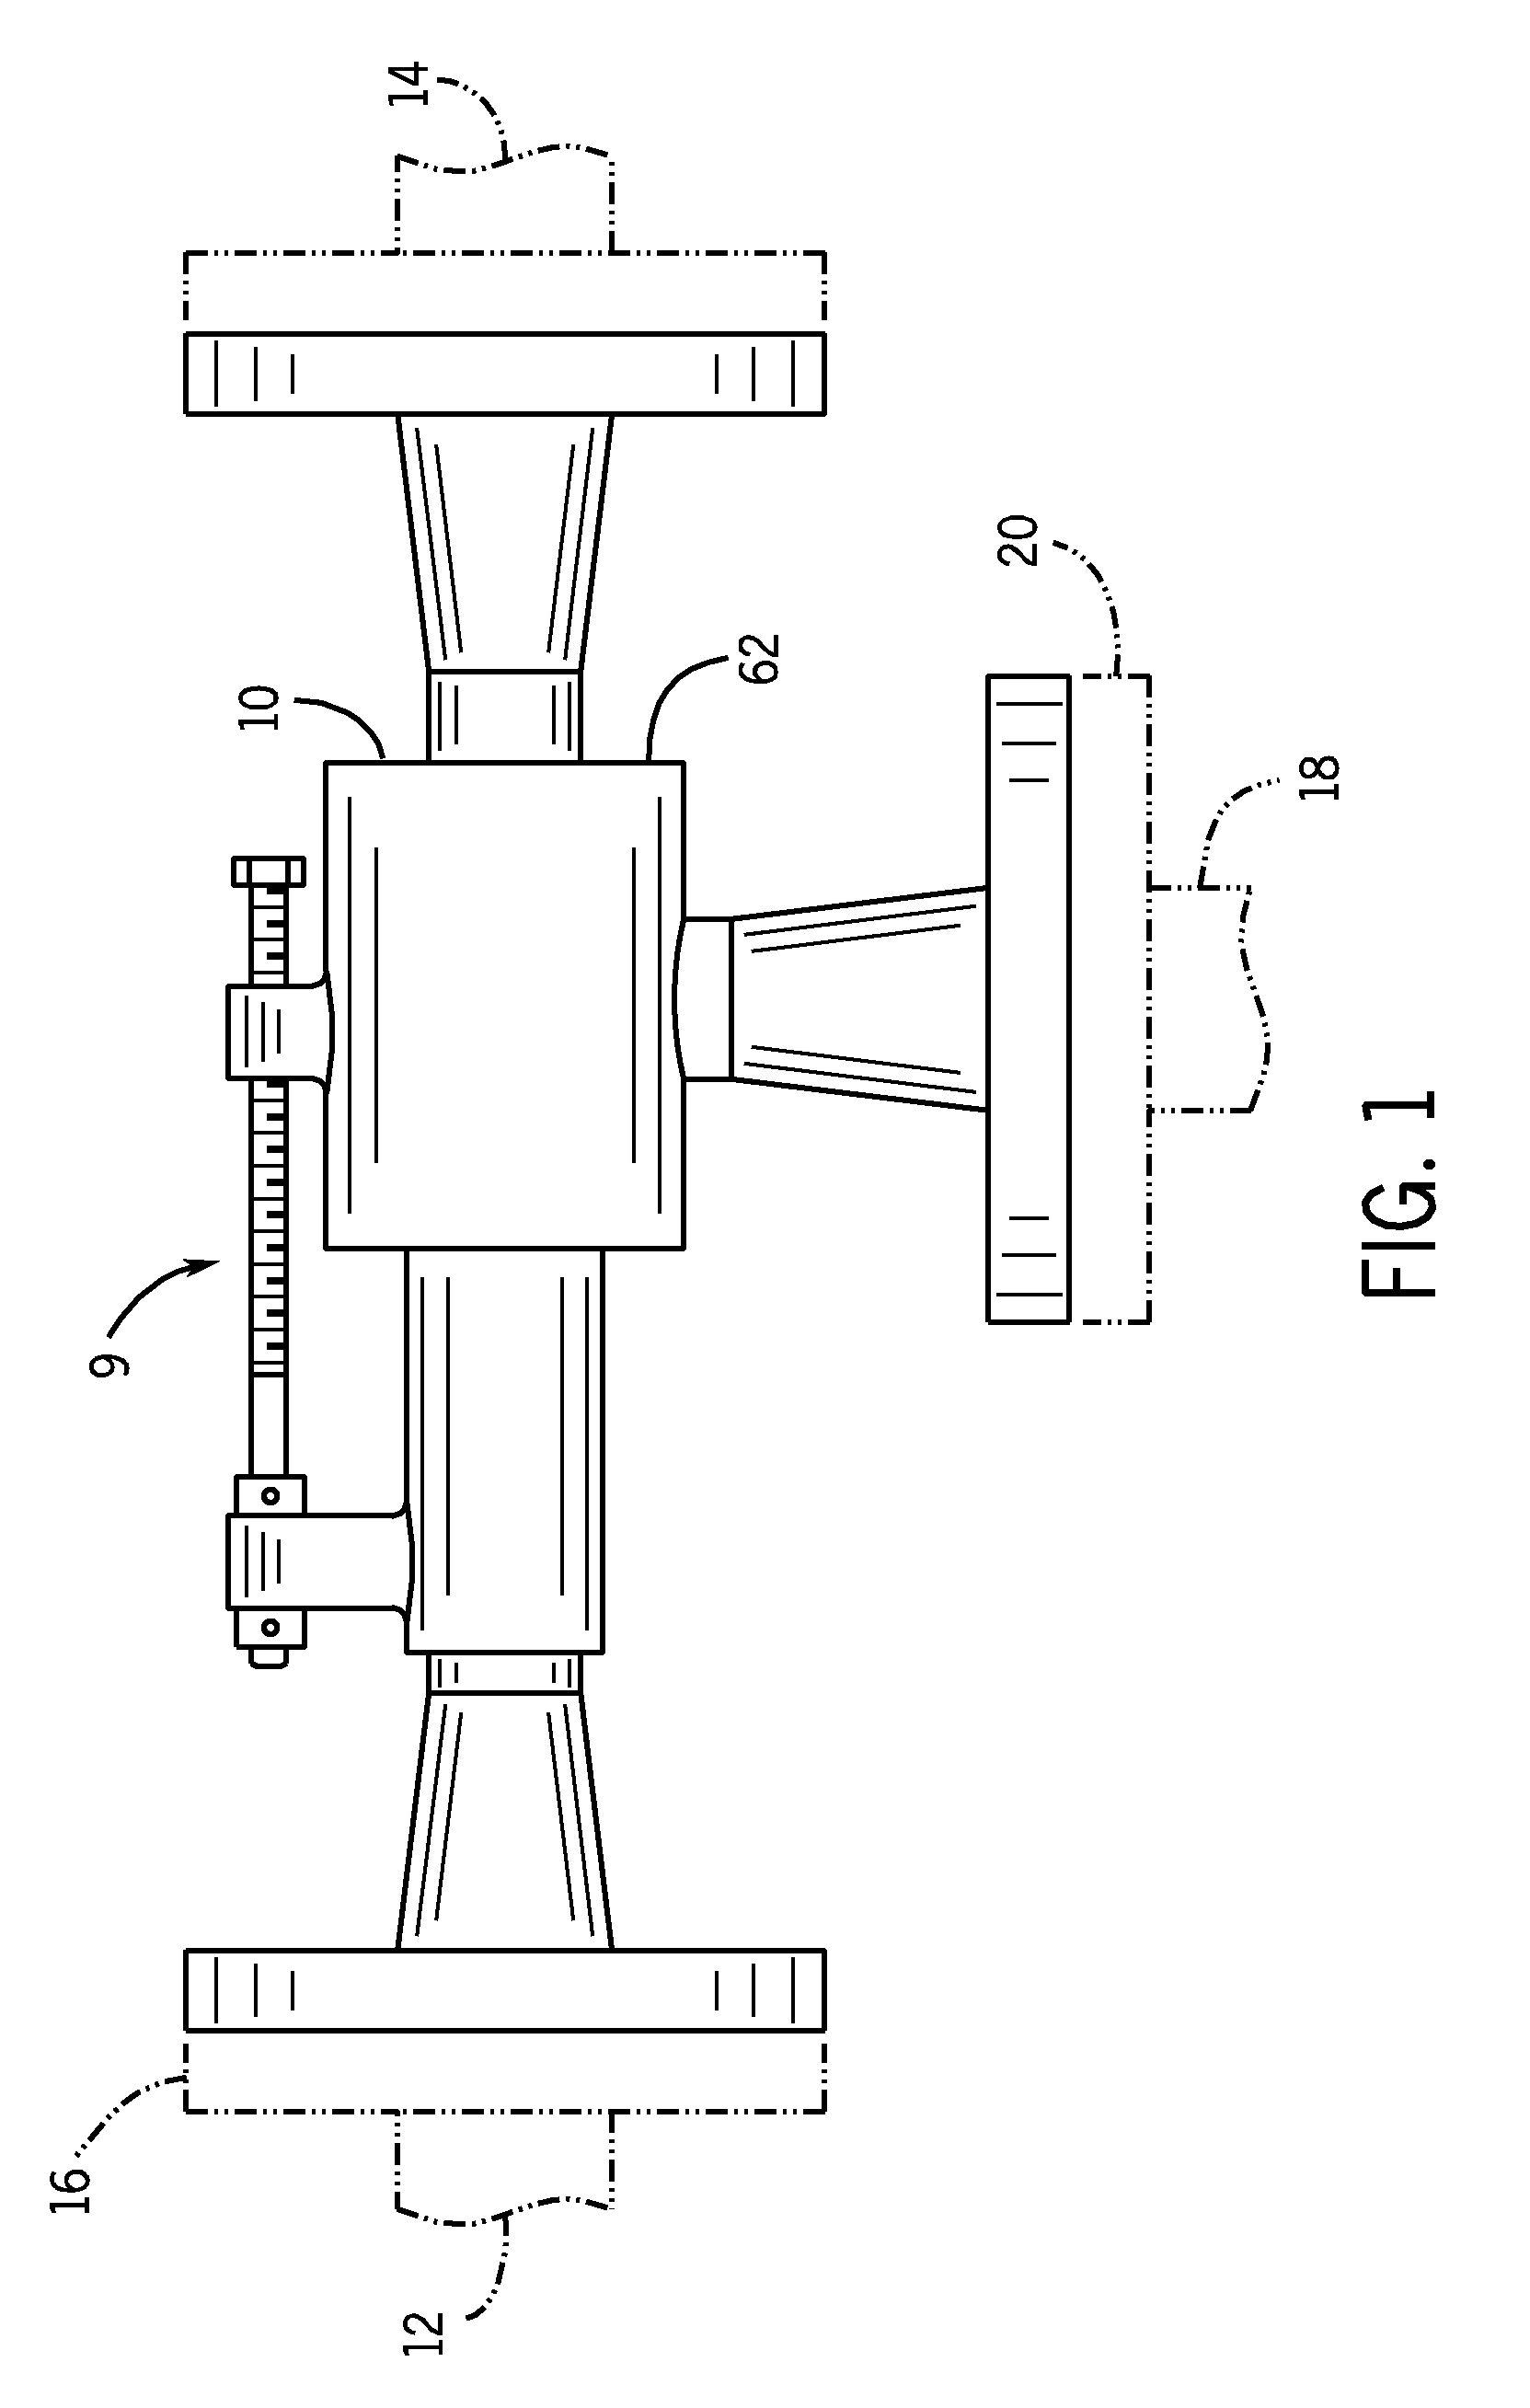 Radial flow steam injection heater